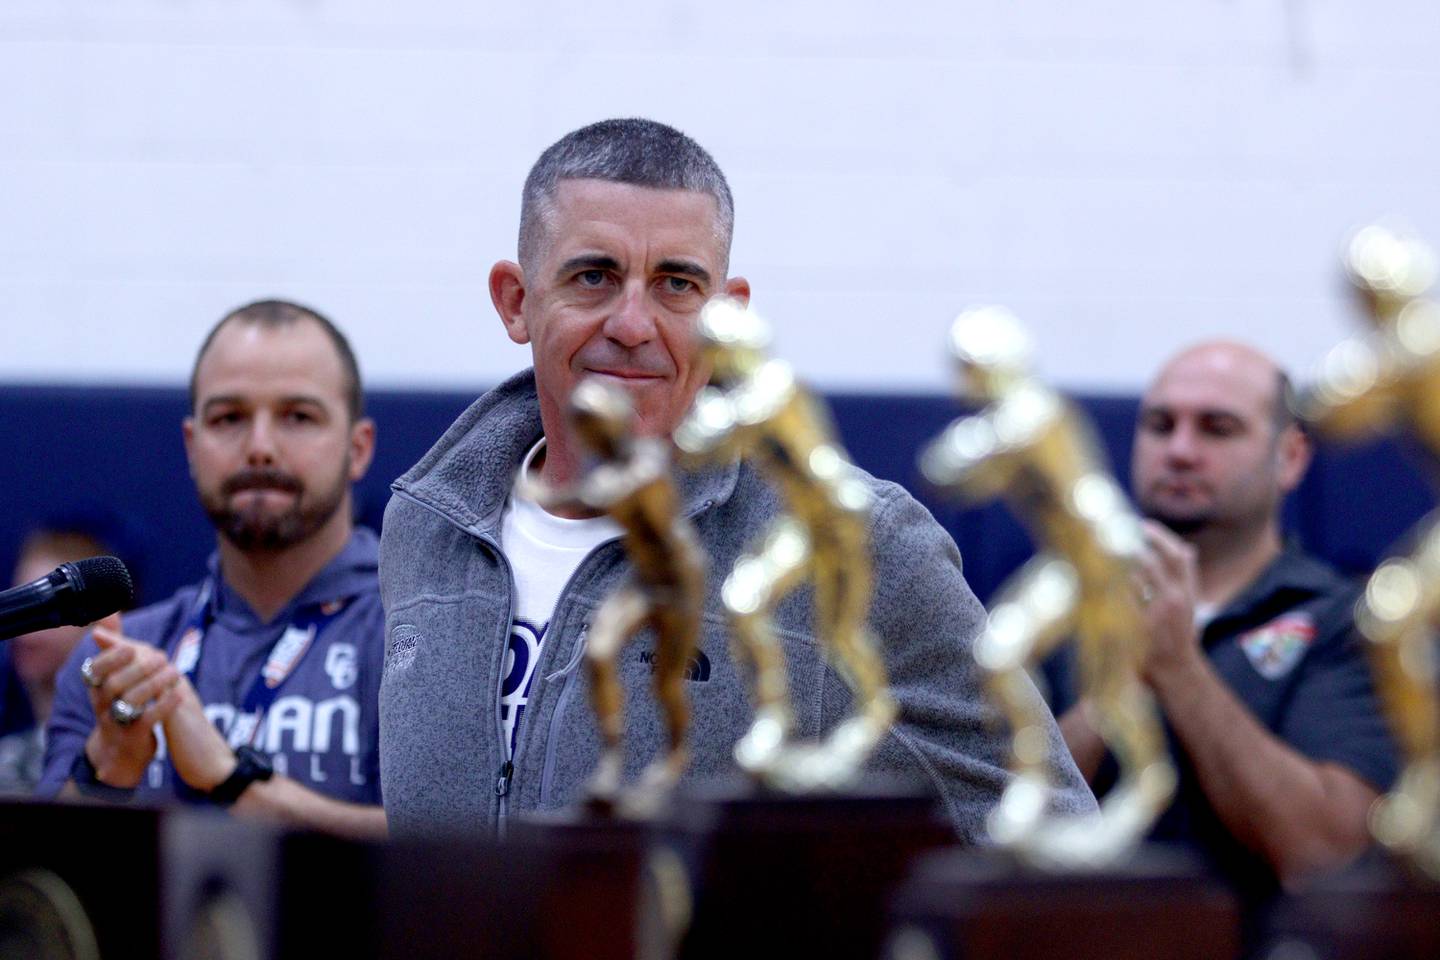 Head Coach Brad Seaburg addresses the audience during a celebration of the IHSA Class 6A Cary-Grove football team at the high school Sunday.